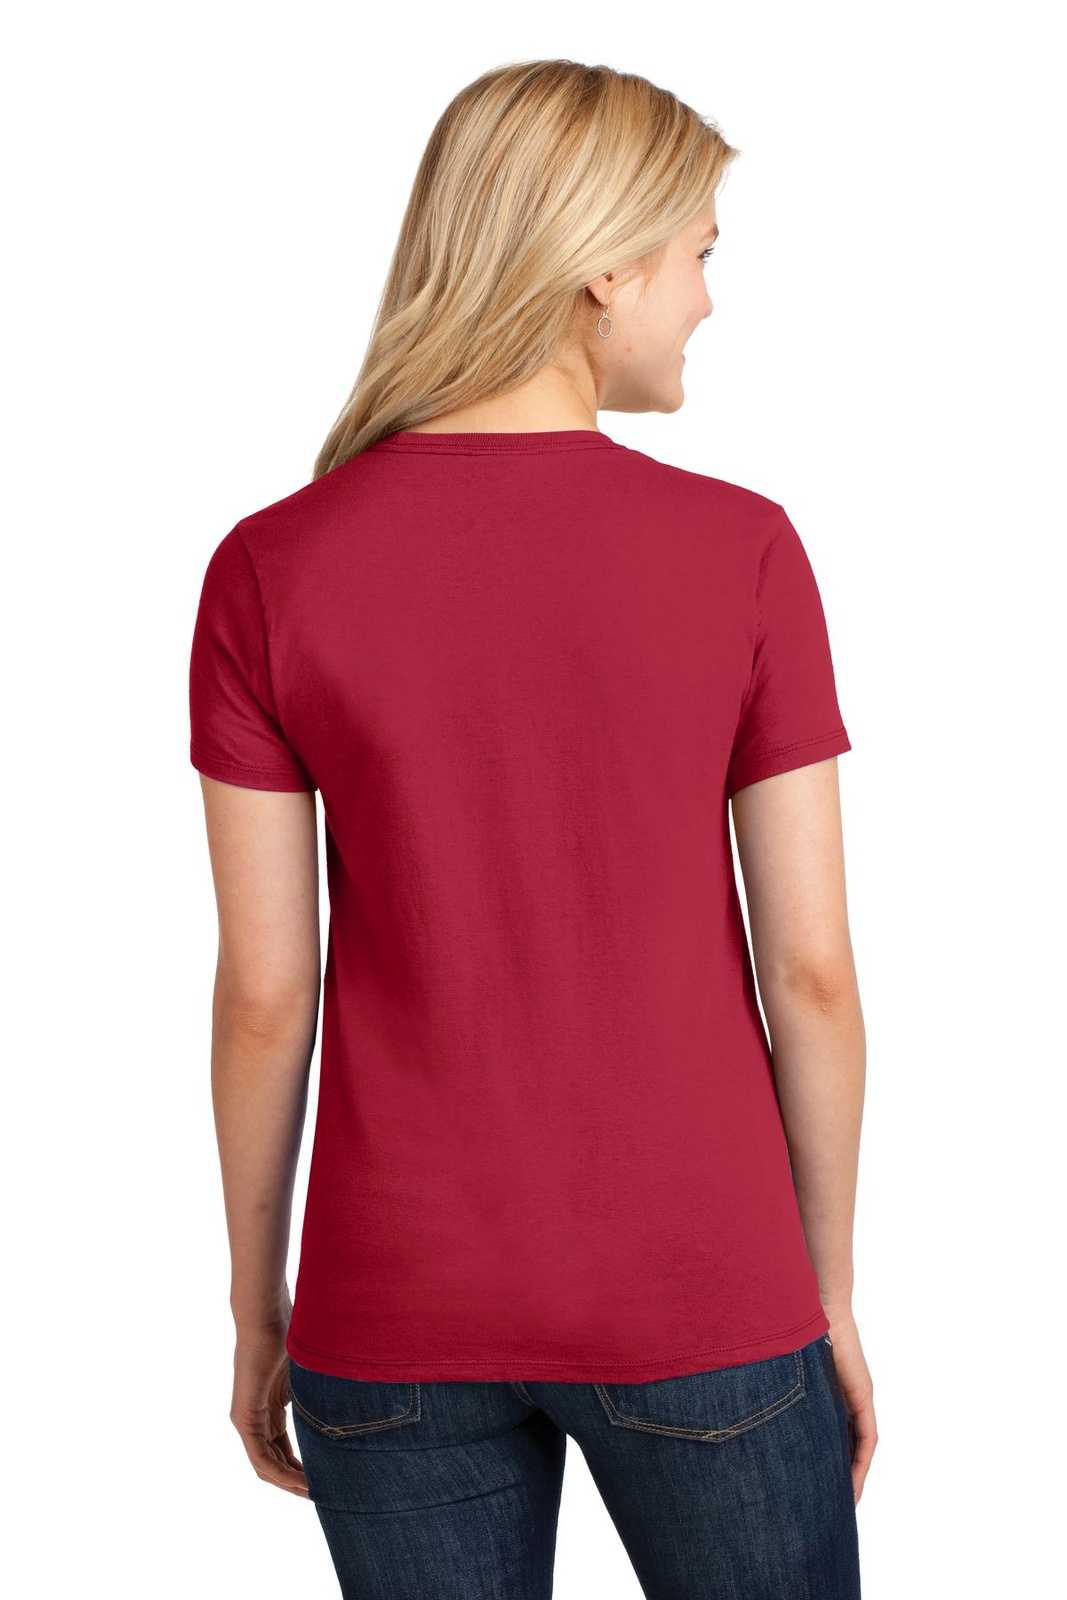 Port & Company LPC54 Ladies Core Cotton Tee - Red - HIT a Double - 1